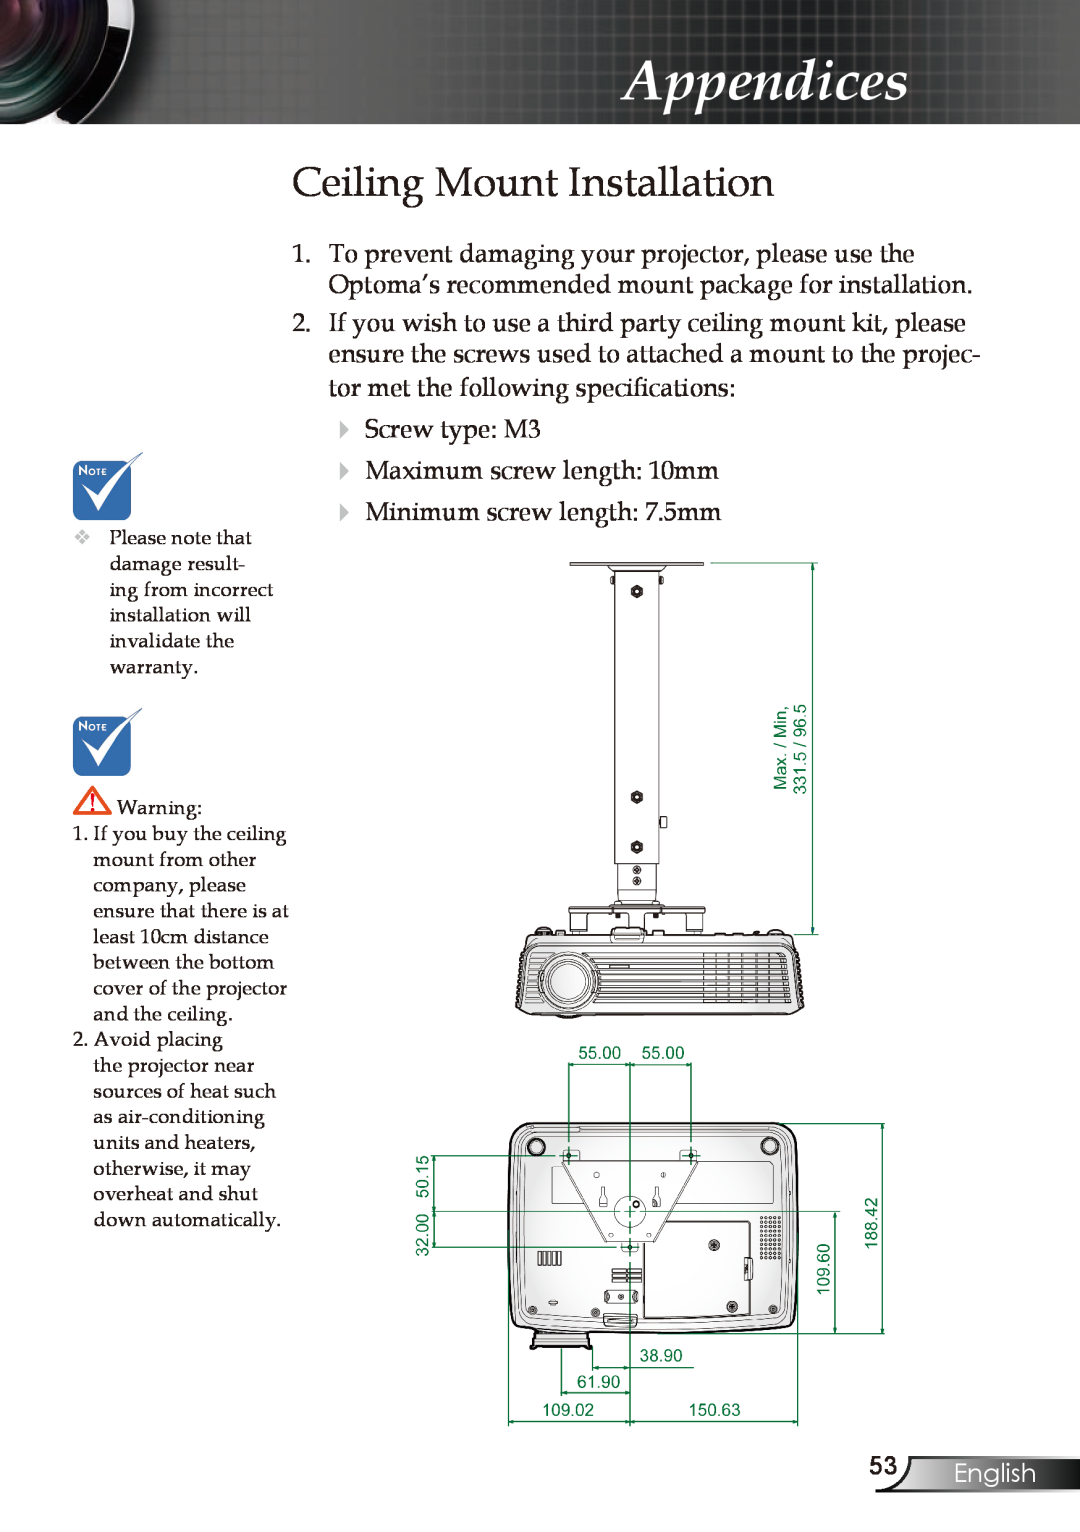 Optoma Technology EP727, EP728, EP723, EP721 manual Ceiling Mount Installation, English, Appendices 